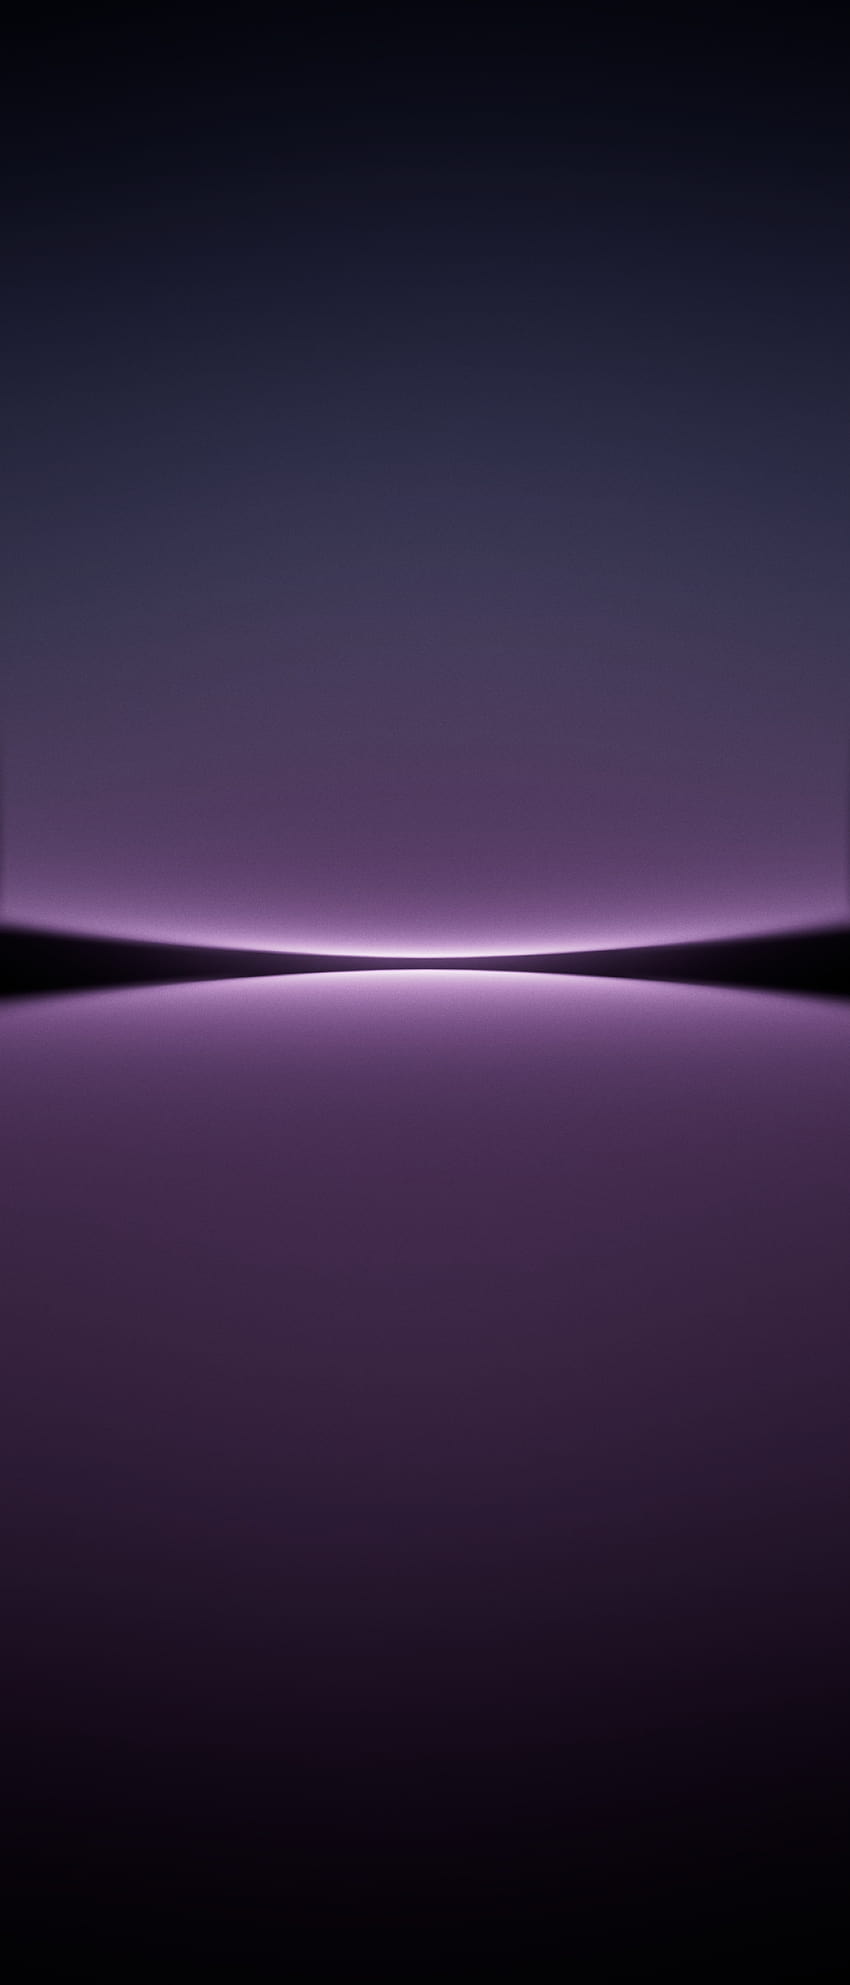 HD wallpaper: purple waves abstract vector art, Sony, Wallpaper, Xperia,  Official | Wallpaper Flare